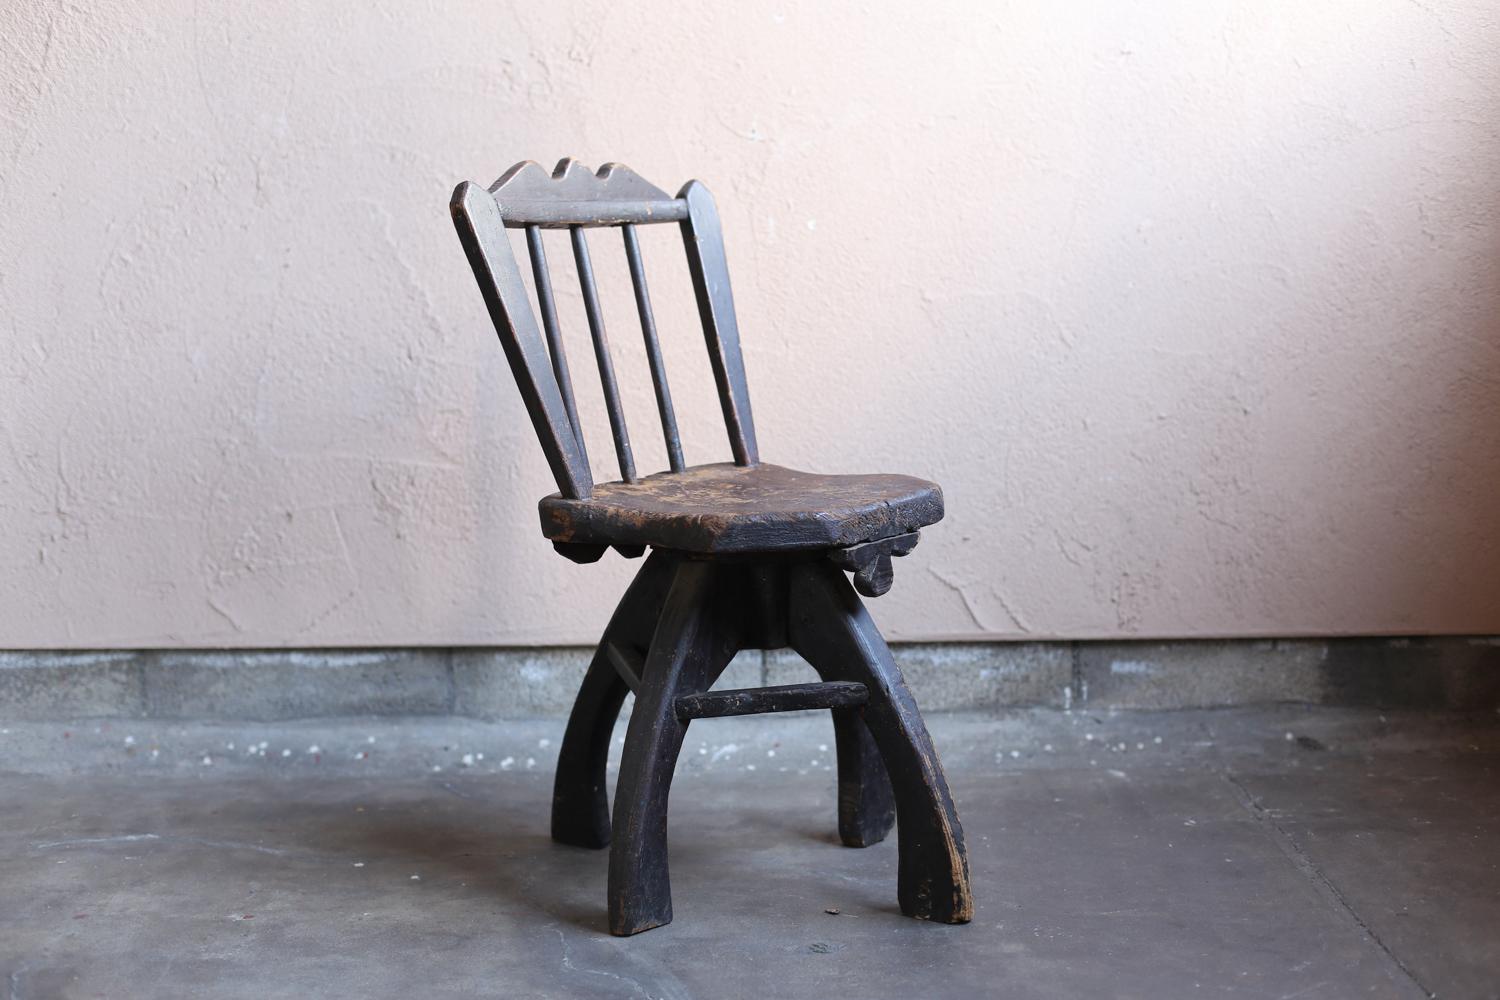 20th Century Primitive Wood Chair from Japan 1860s-1900s / Wabi Sabi Wooden Chair Mingei For Sale